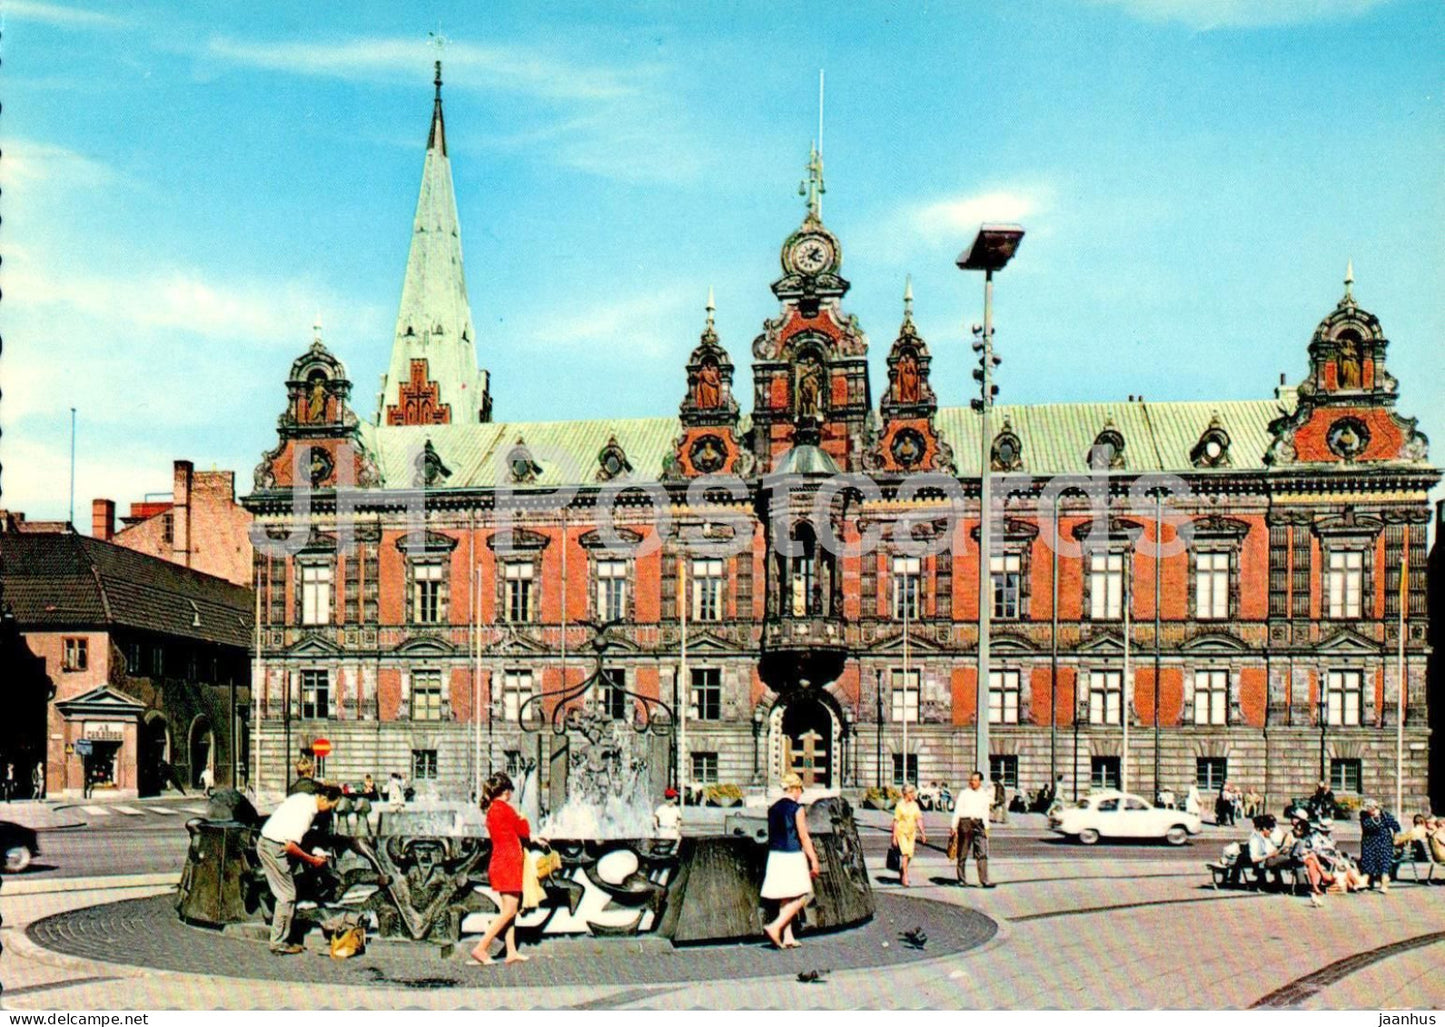 Malmo - Stortorget med Radhuset - town hall - square - 609 - Sweden - unused - JH Postcards